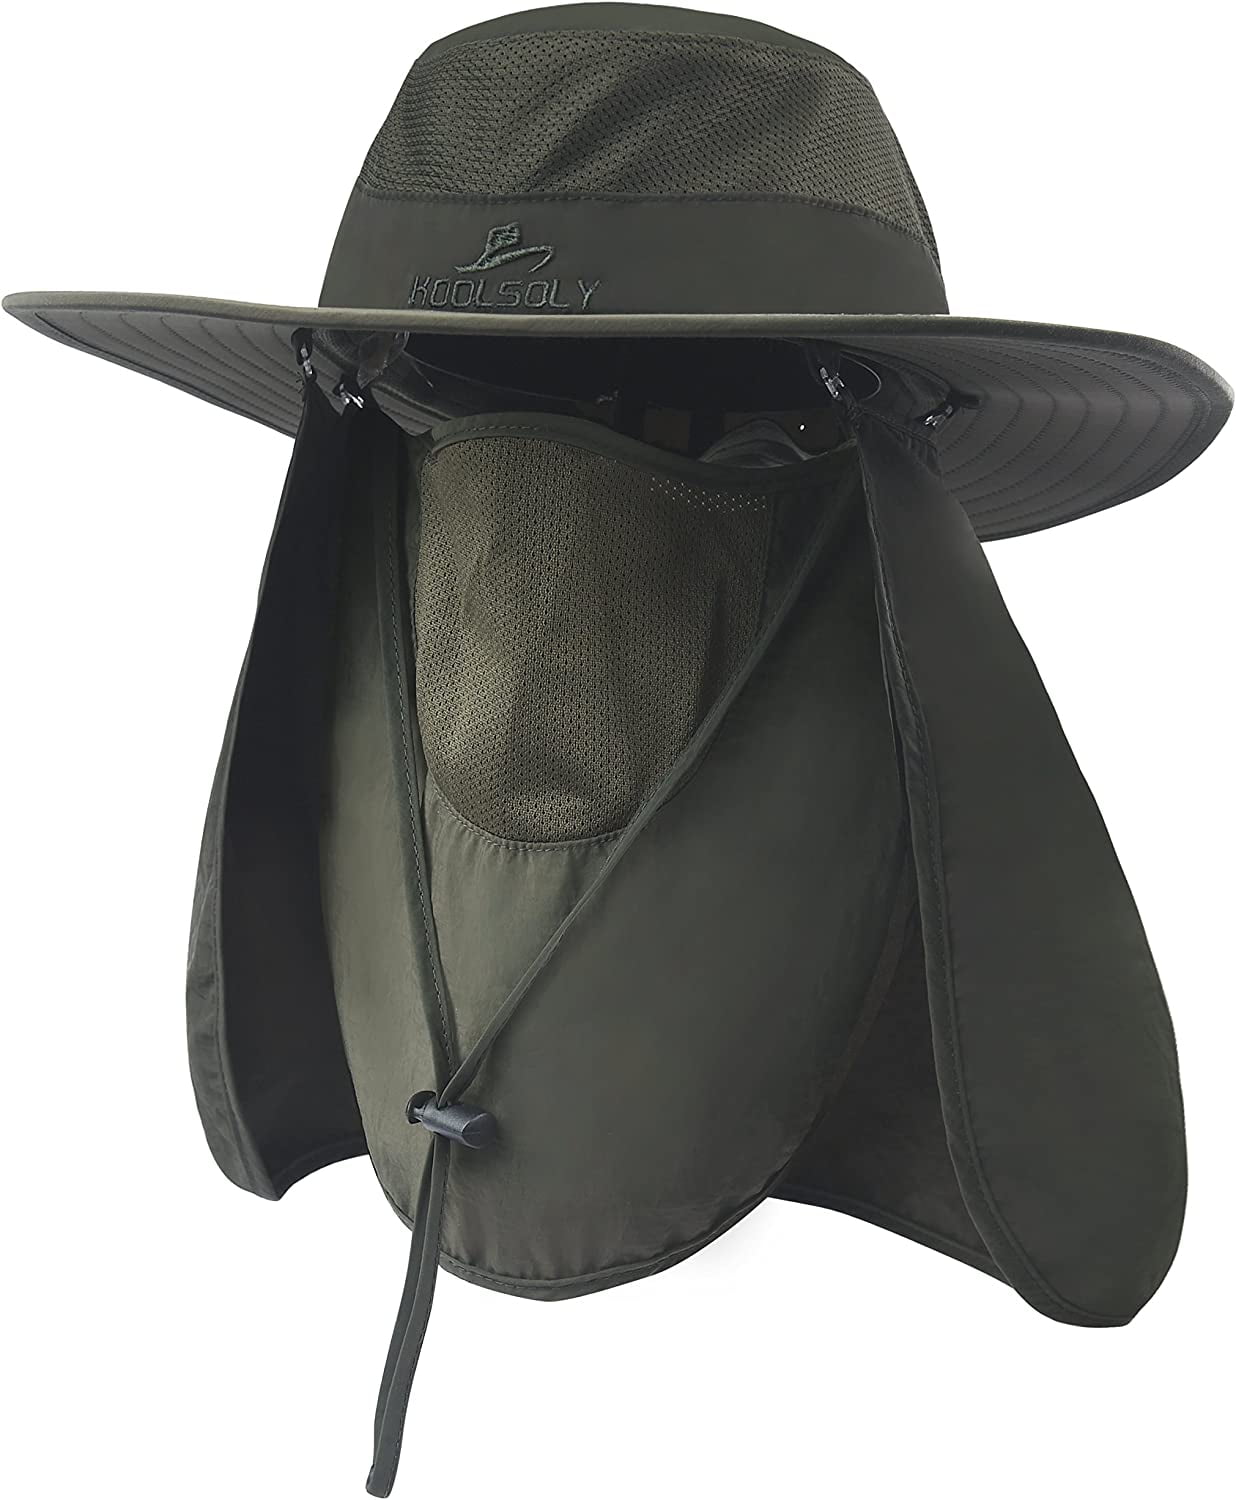 KOOLSOLY Fishing Hat,Sun Cap with UPF 50+ Sun Protection and Neck  Flap,Bucket Hat for Man and Women-Dark Gray 